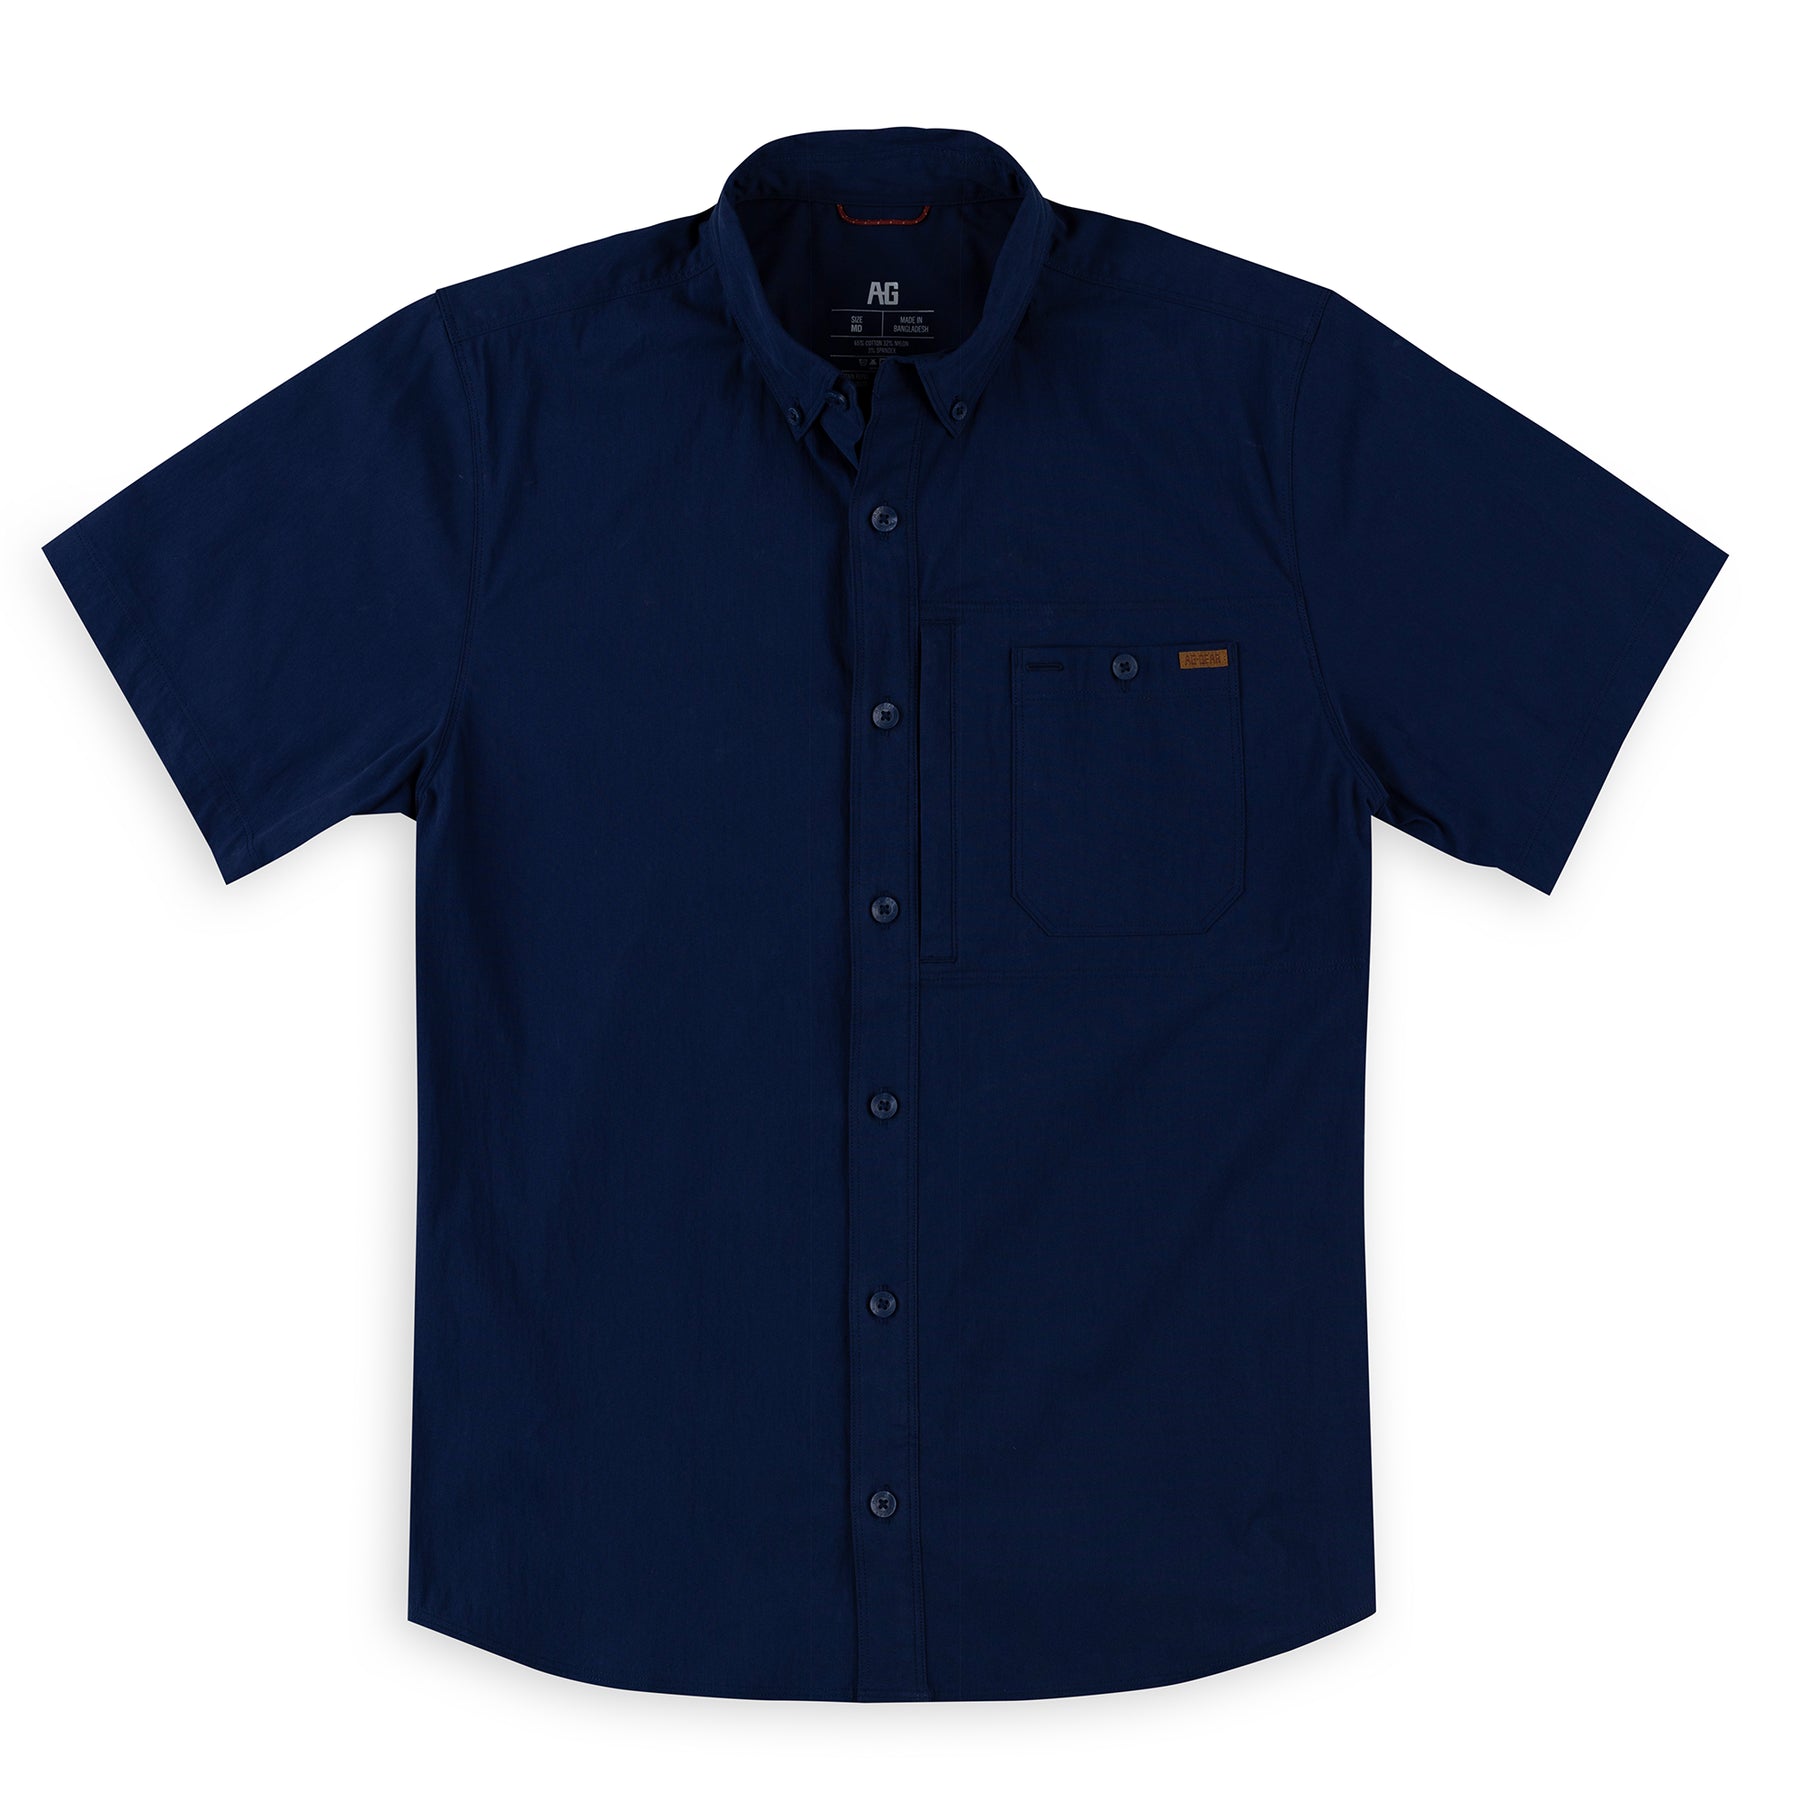 Cotton Farm Shirt, Durable, Water Resistant, Classic Fit, Ranch Shirt Navy / MD